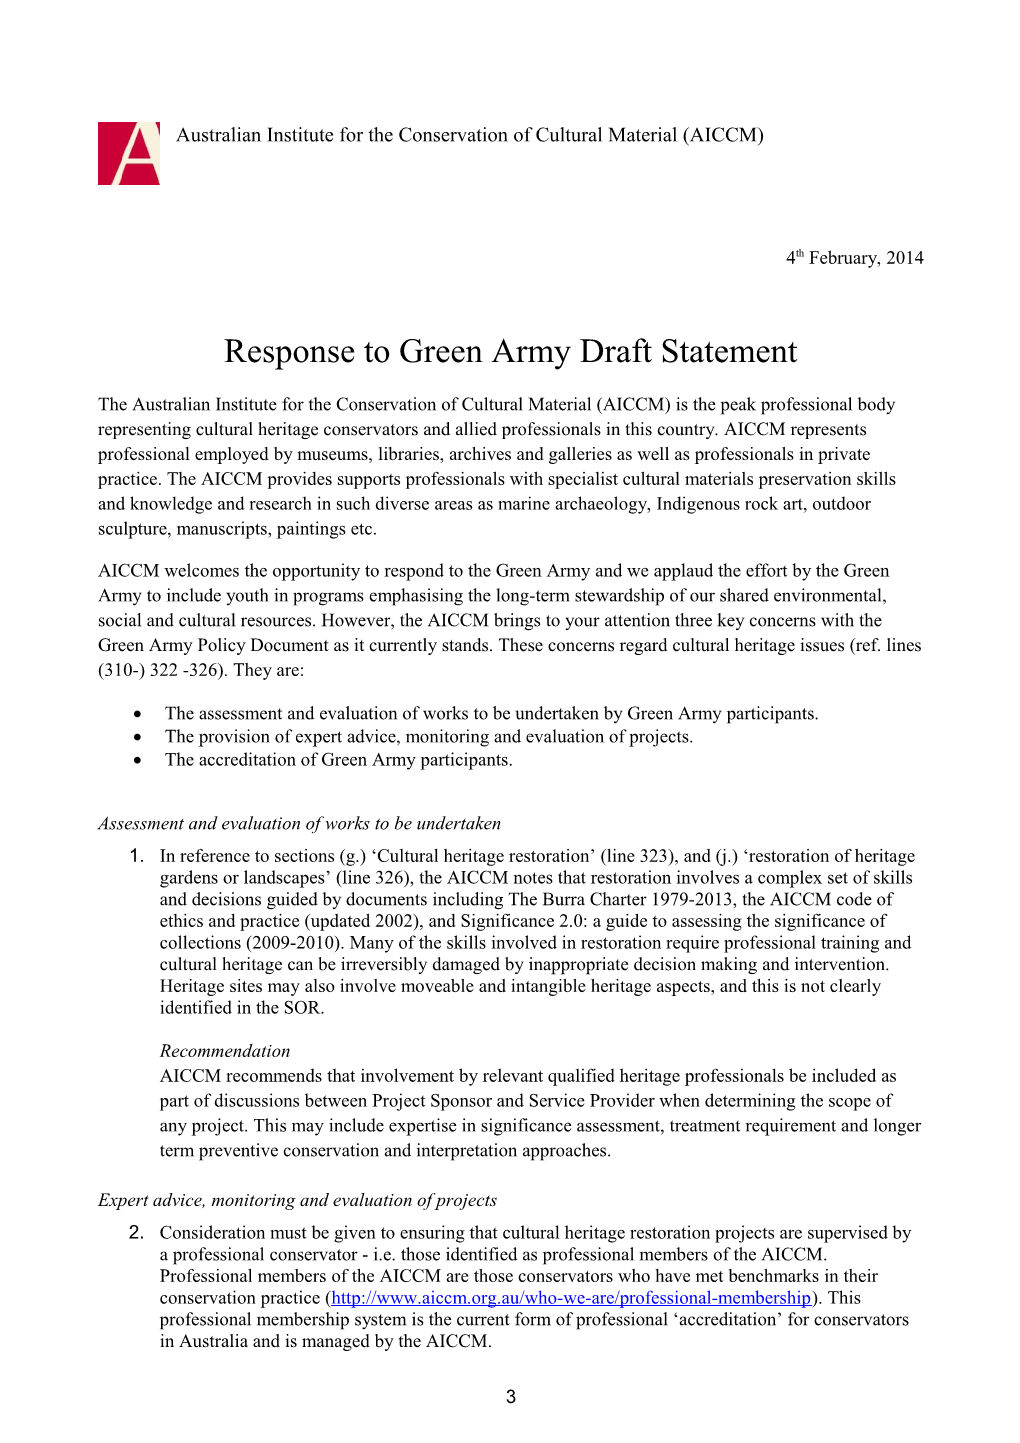 Coversheet for Submissions - Green Army